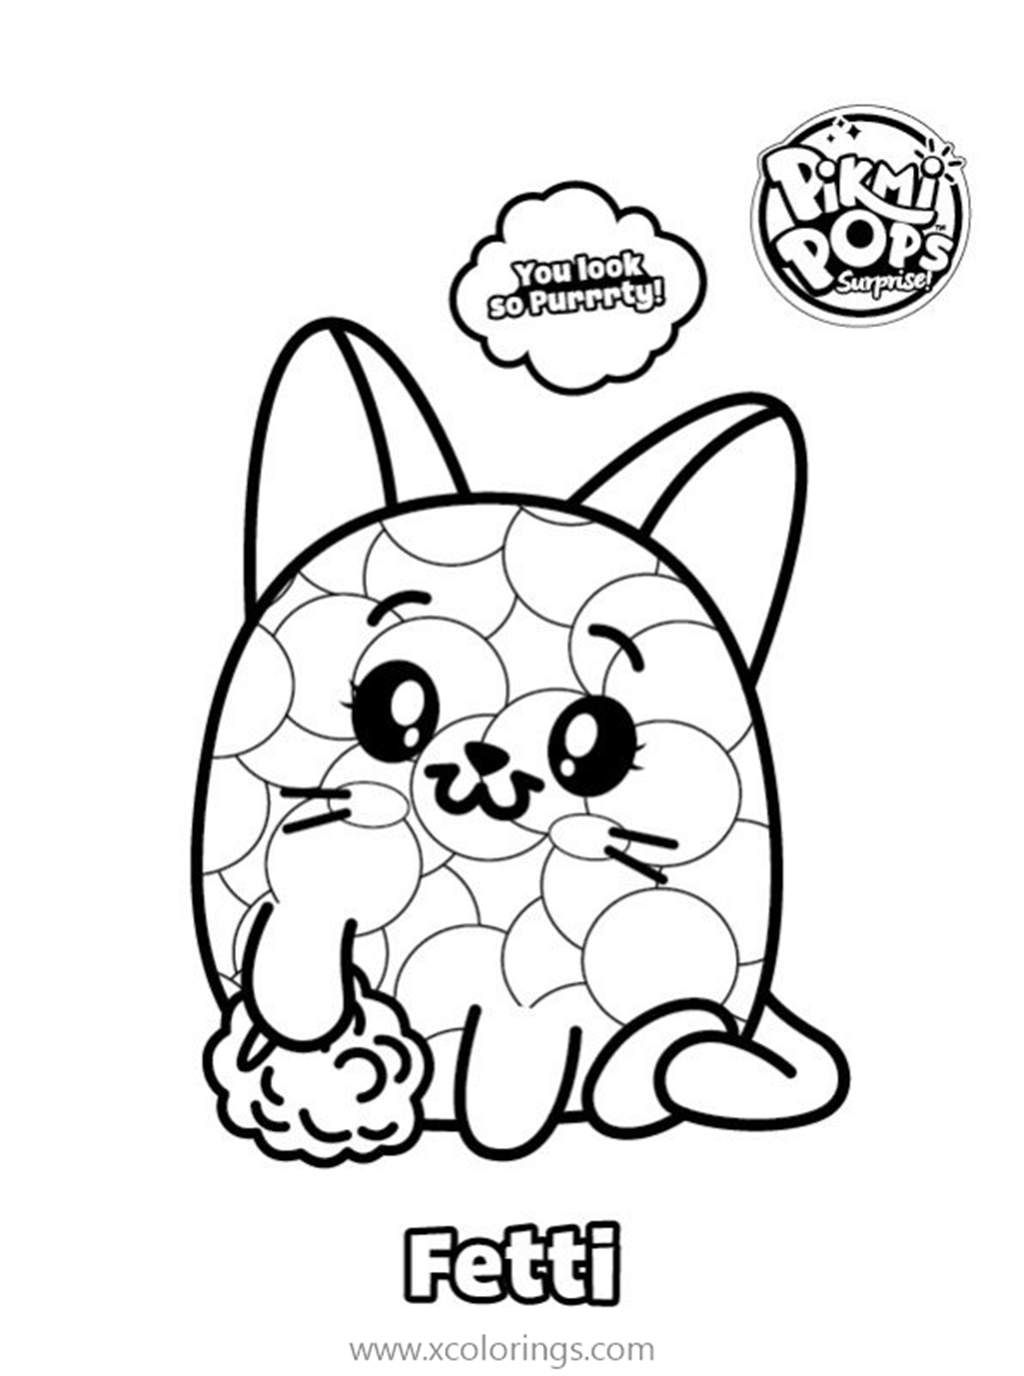 Free Fetti from Pikmi Pops Coloring Pages printable